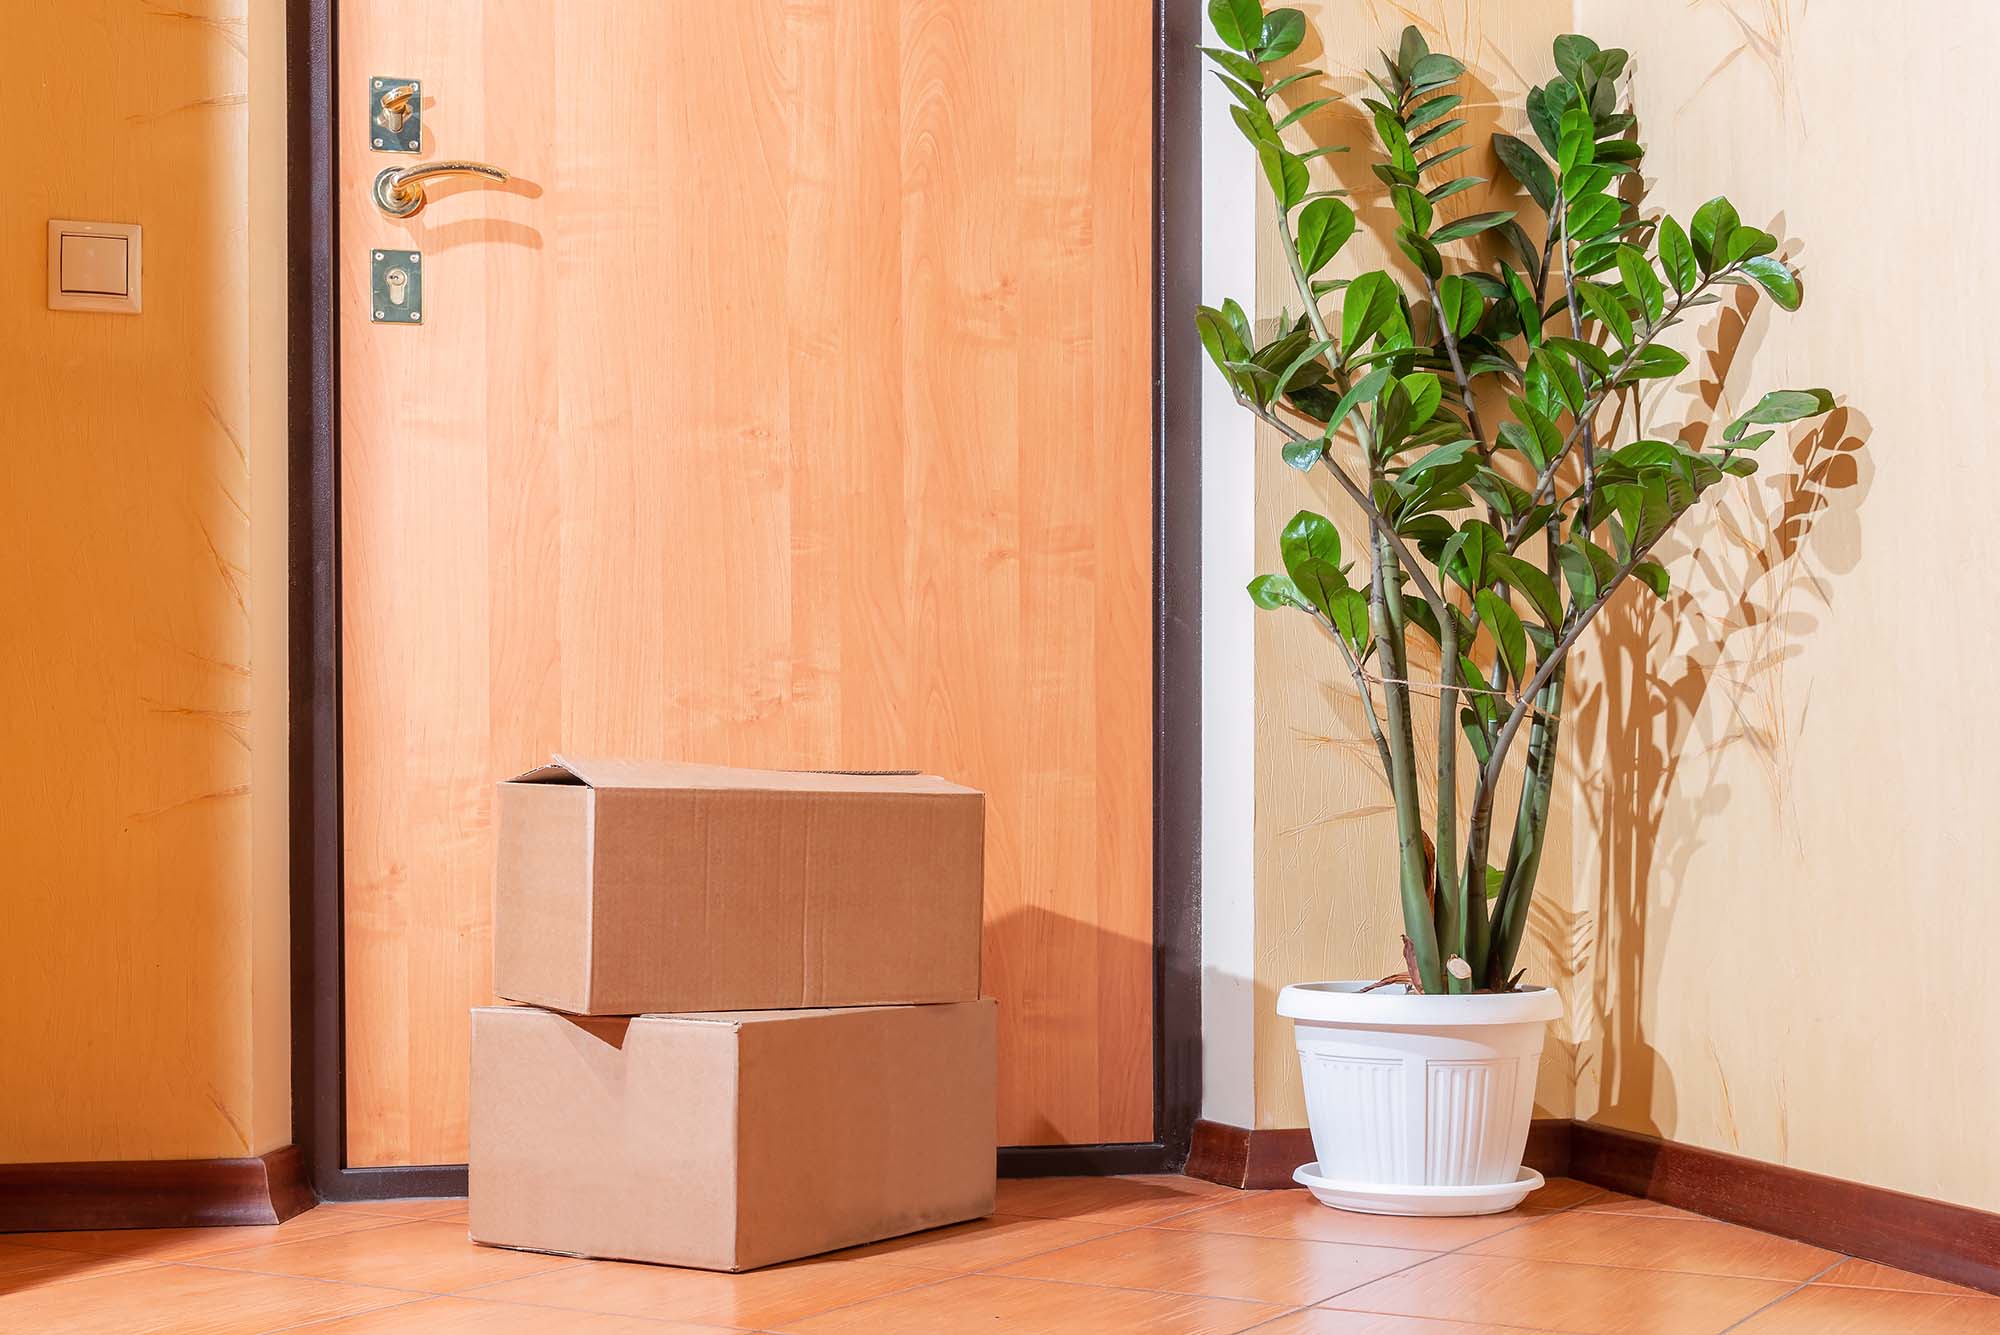 photo of 2 brown boxes stacked in front of a nondescript apartment door. a potted indoor tree stands to the side of the door.